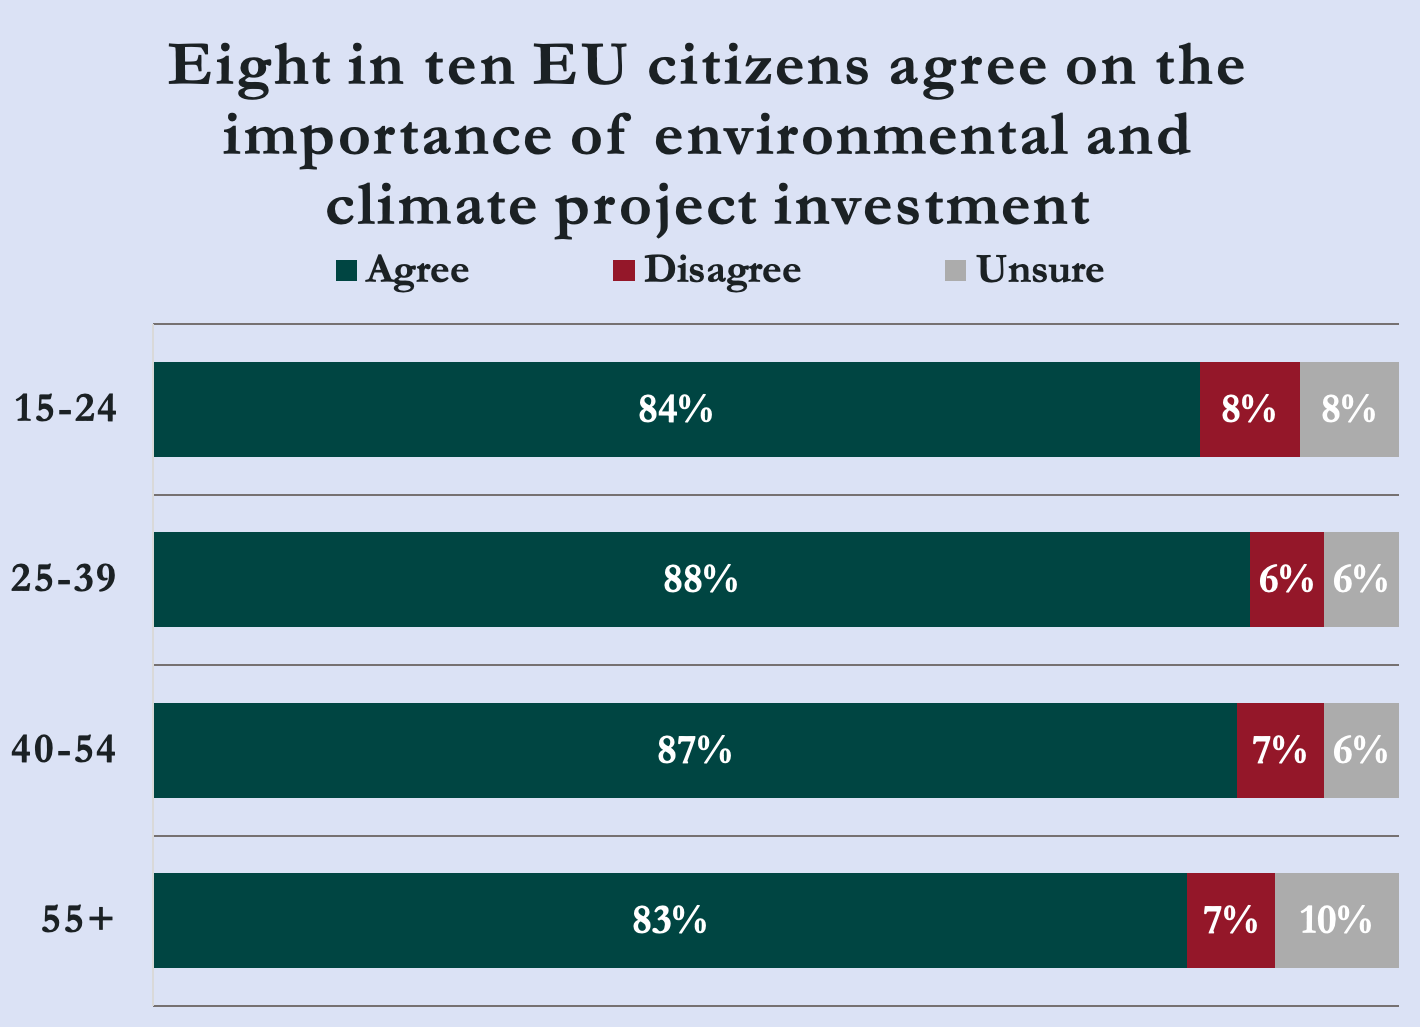 Perceived importance of investments into climate projects